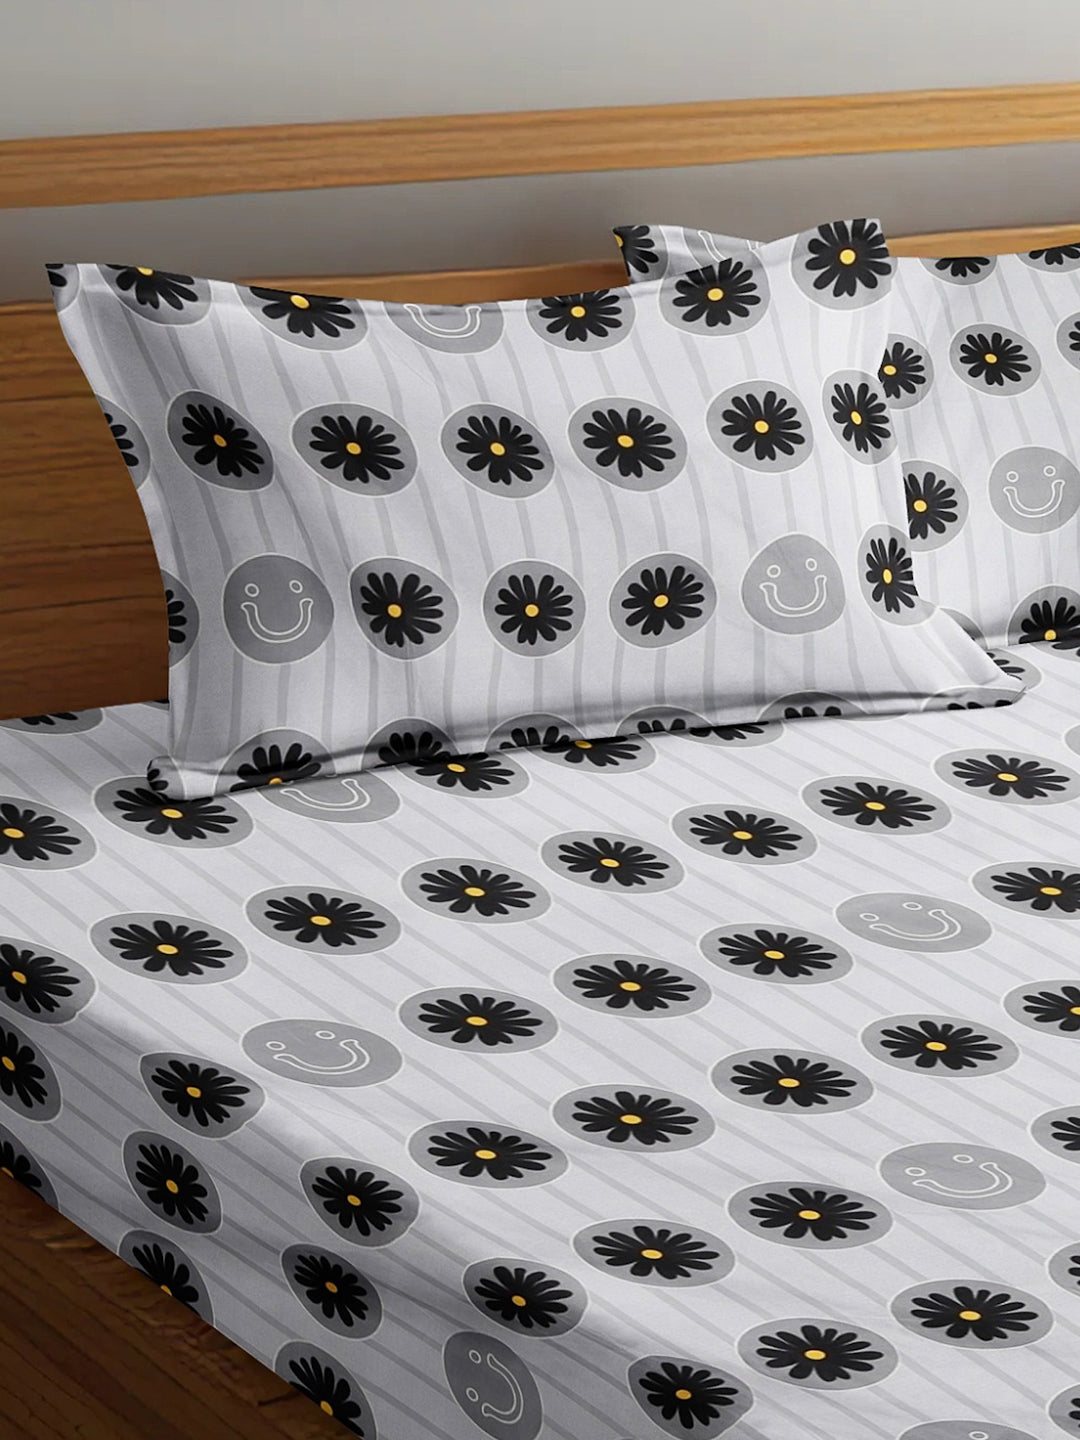 Arrabi Grey Floral TC Cotton Blend Super King Size Fitted Bedsheet with 2 Pillow Covers (270 X 260 Cm)